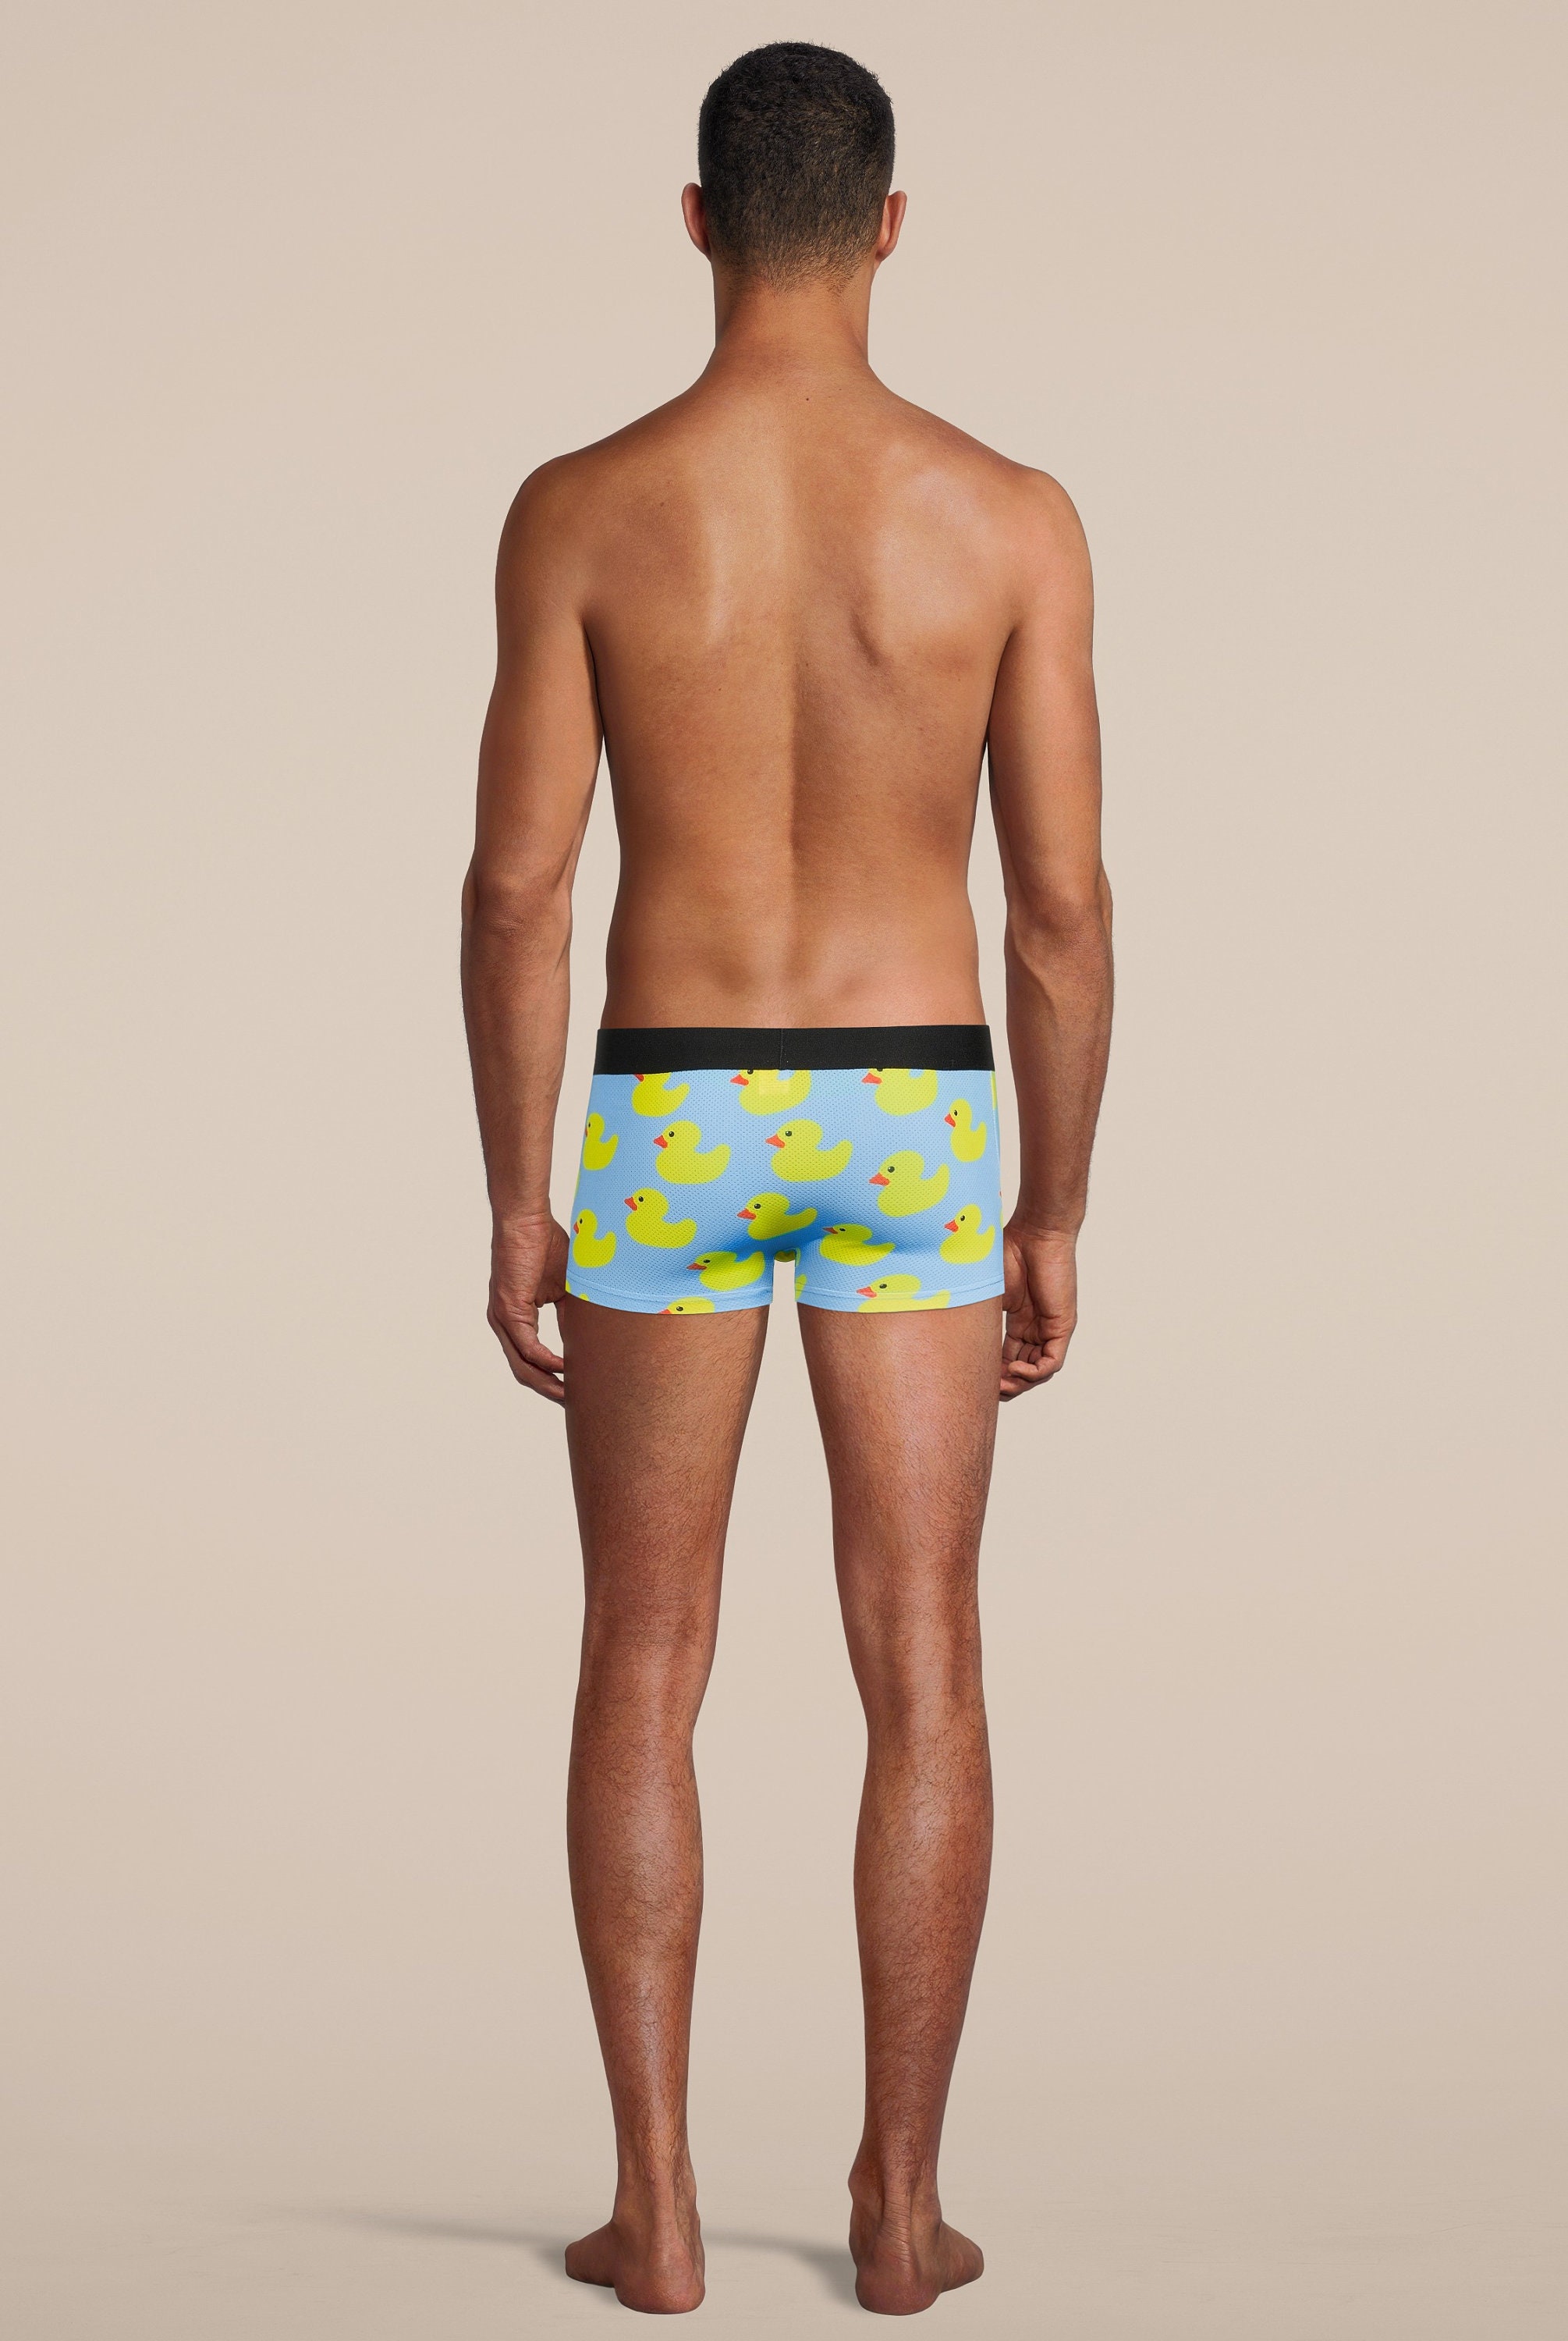 Men's Rubber Duck Boxer Trunks with Pouch, Men's Blue and Yellow Underwear